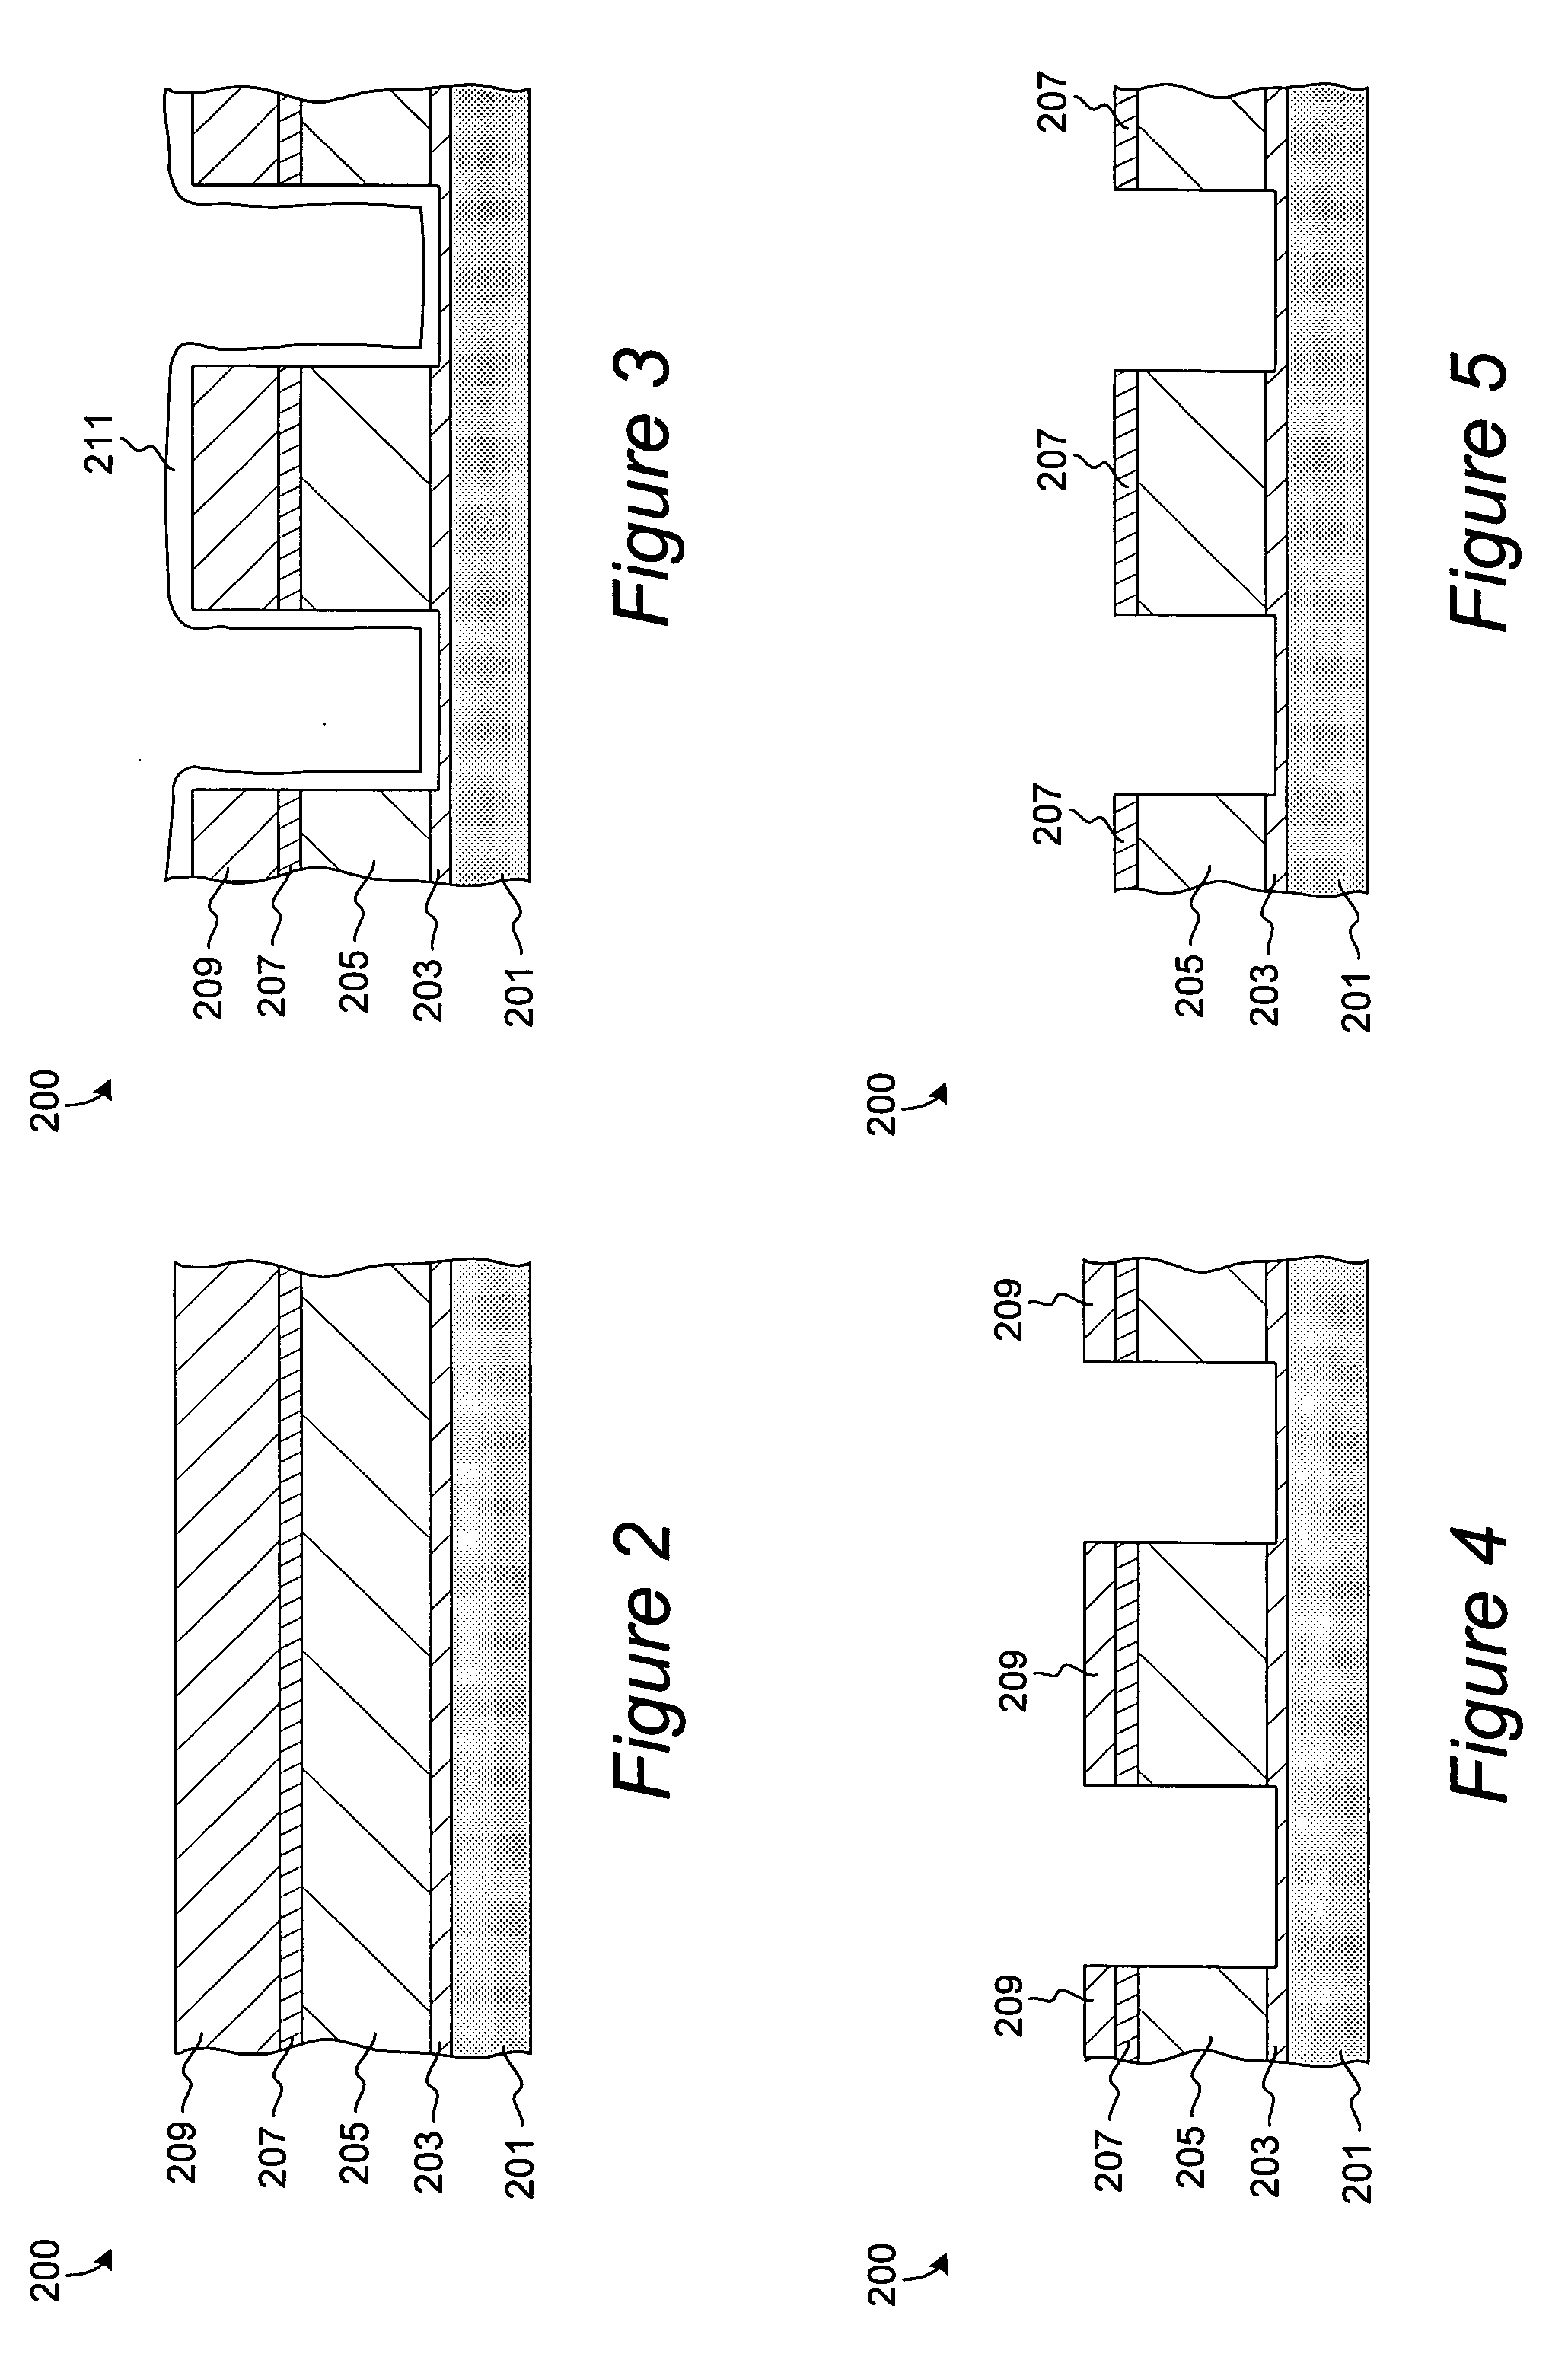 Methods for post polysilicon etch photoresist and polymer removal with minimal gate oxide loss